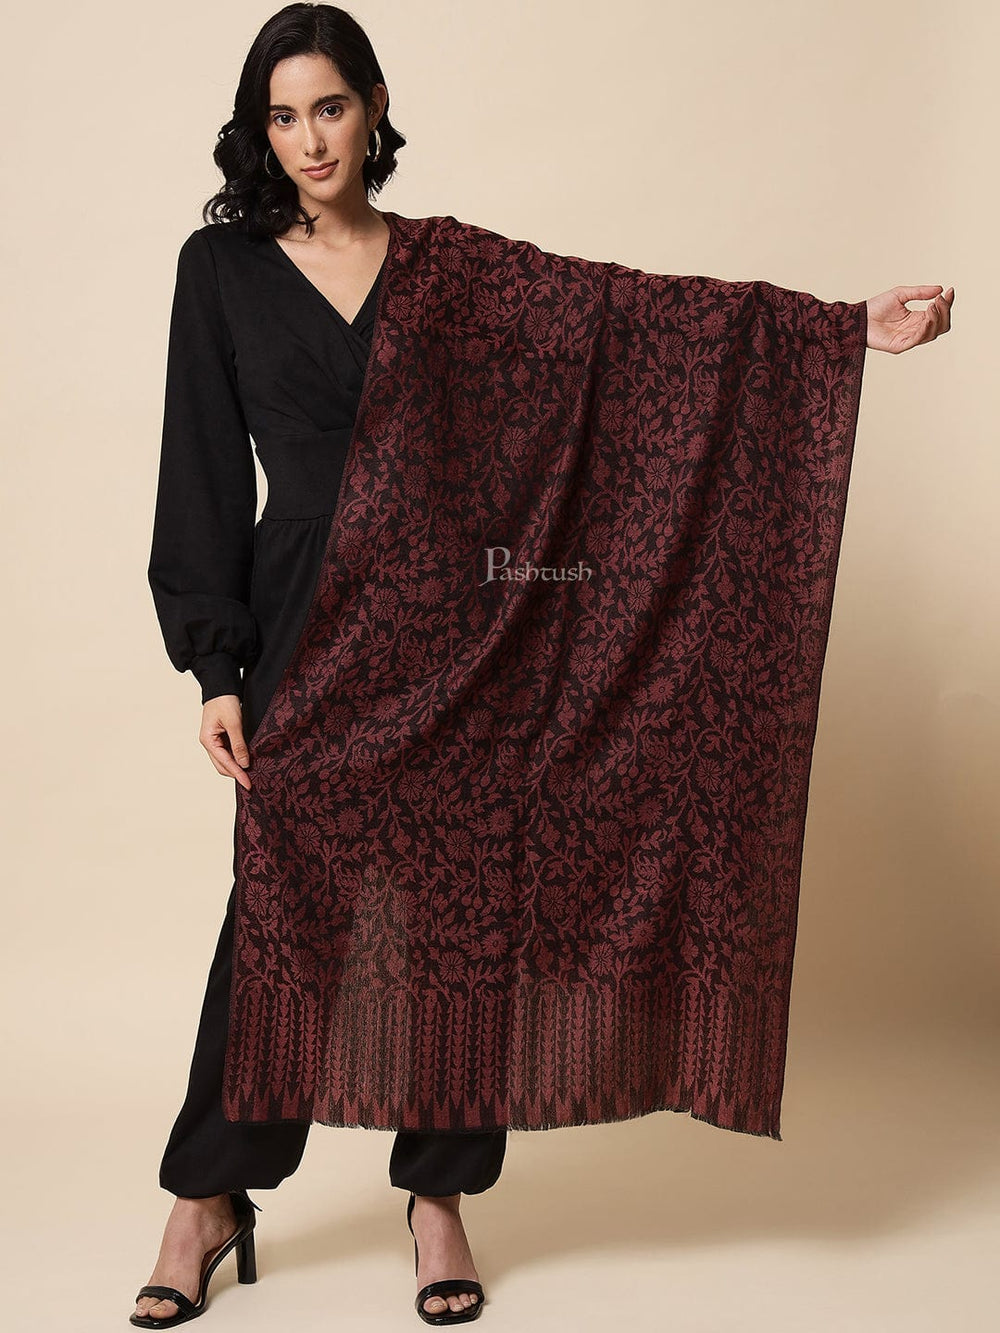 Pashtush India Womens Stoles and Scarves Scarf Pashtush Womens Stole, Soft and Warm, Reversible Floral Weave, Burgundy